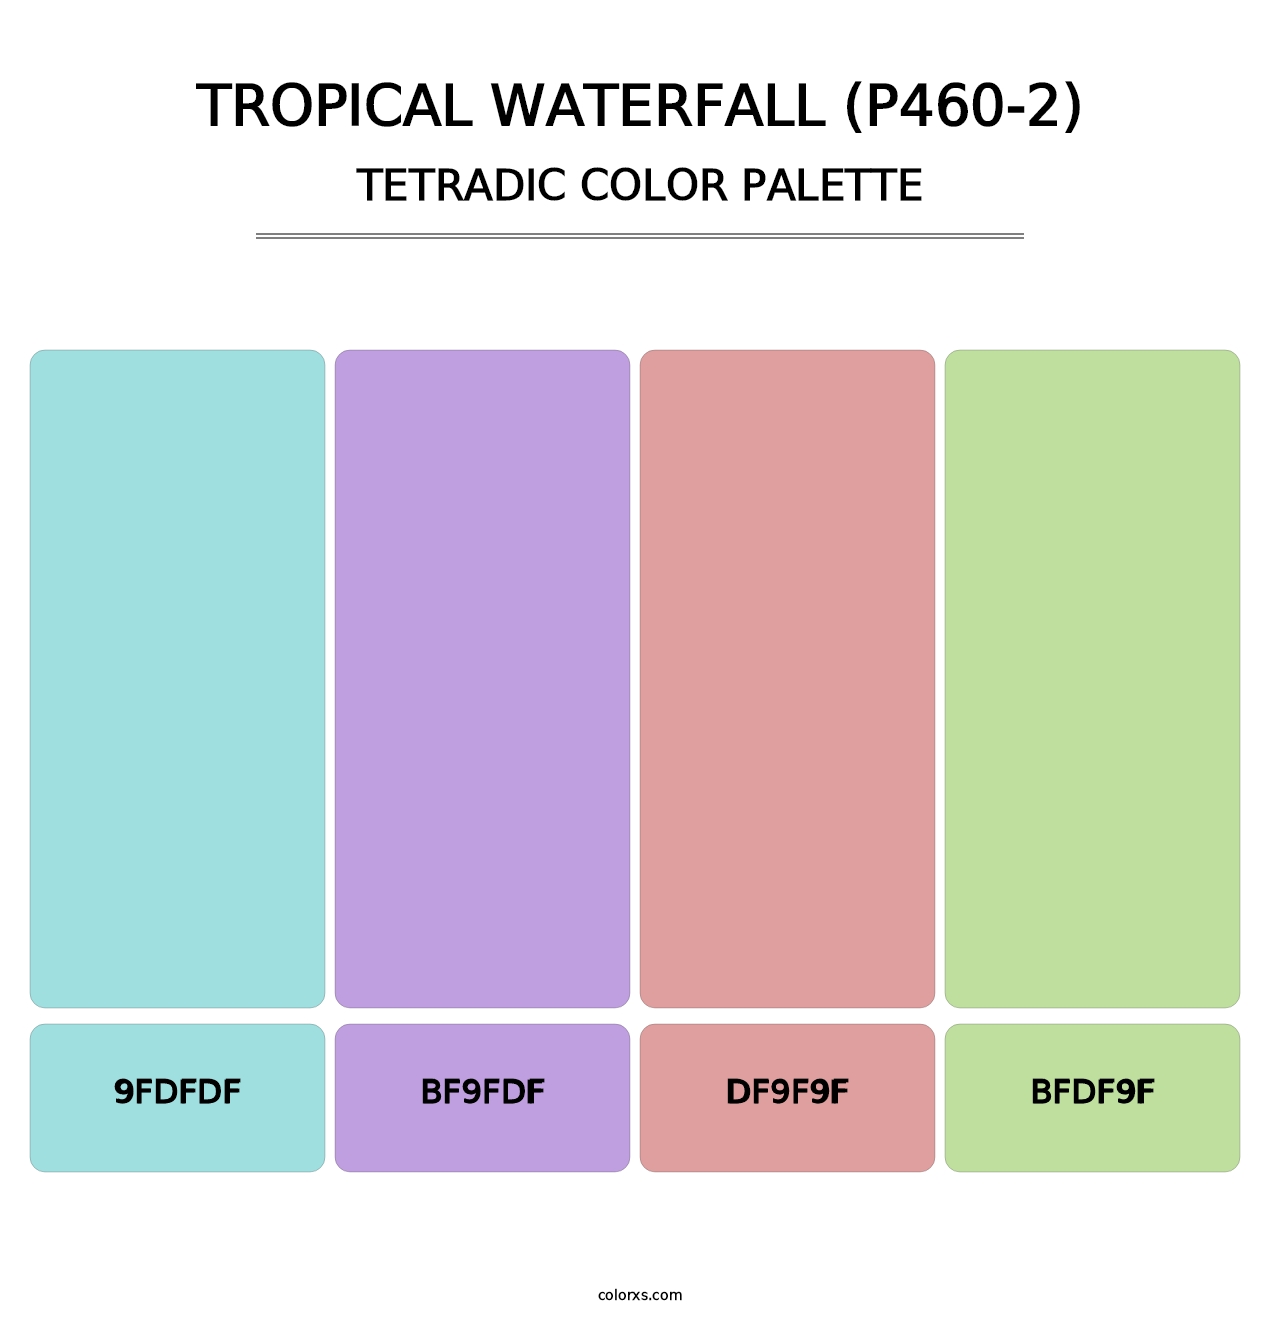 Tropical Waterfall (P460-2) - Tetradic Color Palette